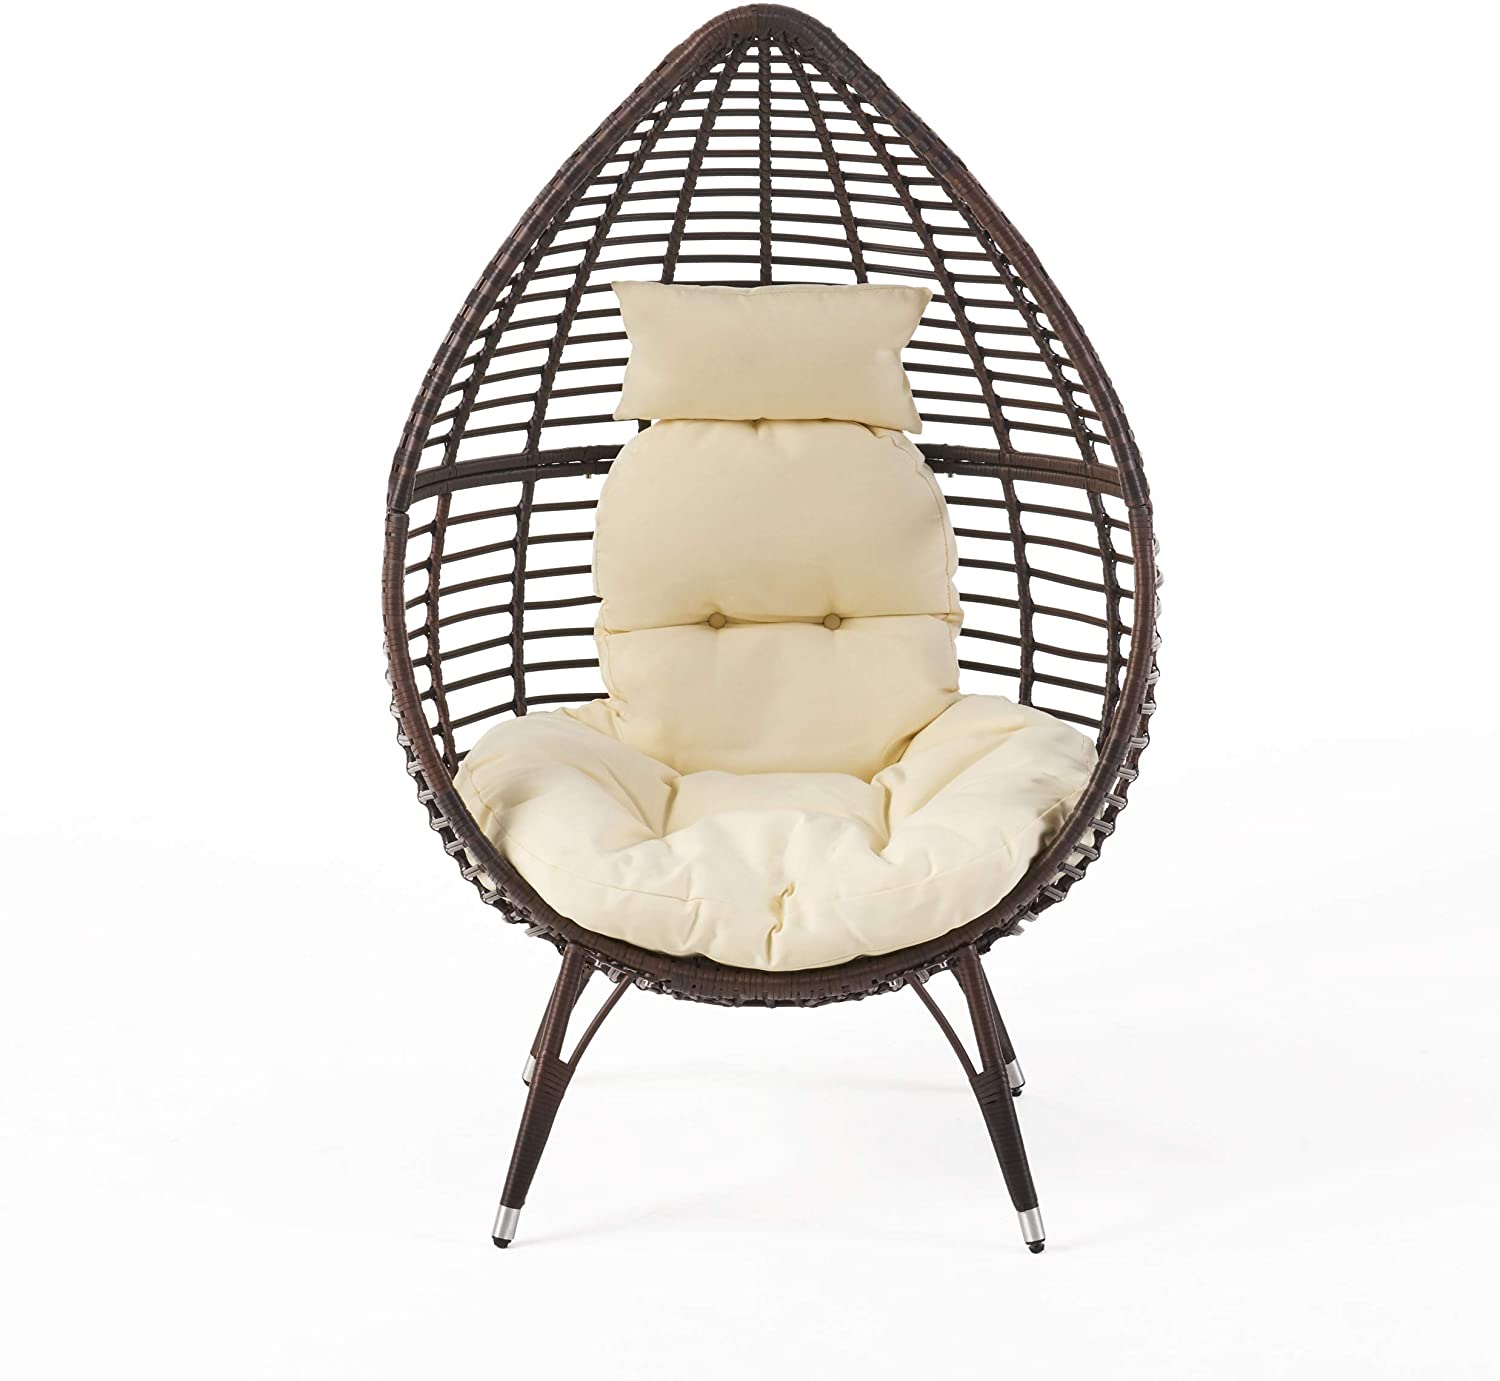 Christopher Knight Home Wicker All-Weather Patio Egg Chair